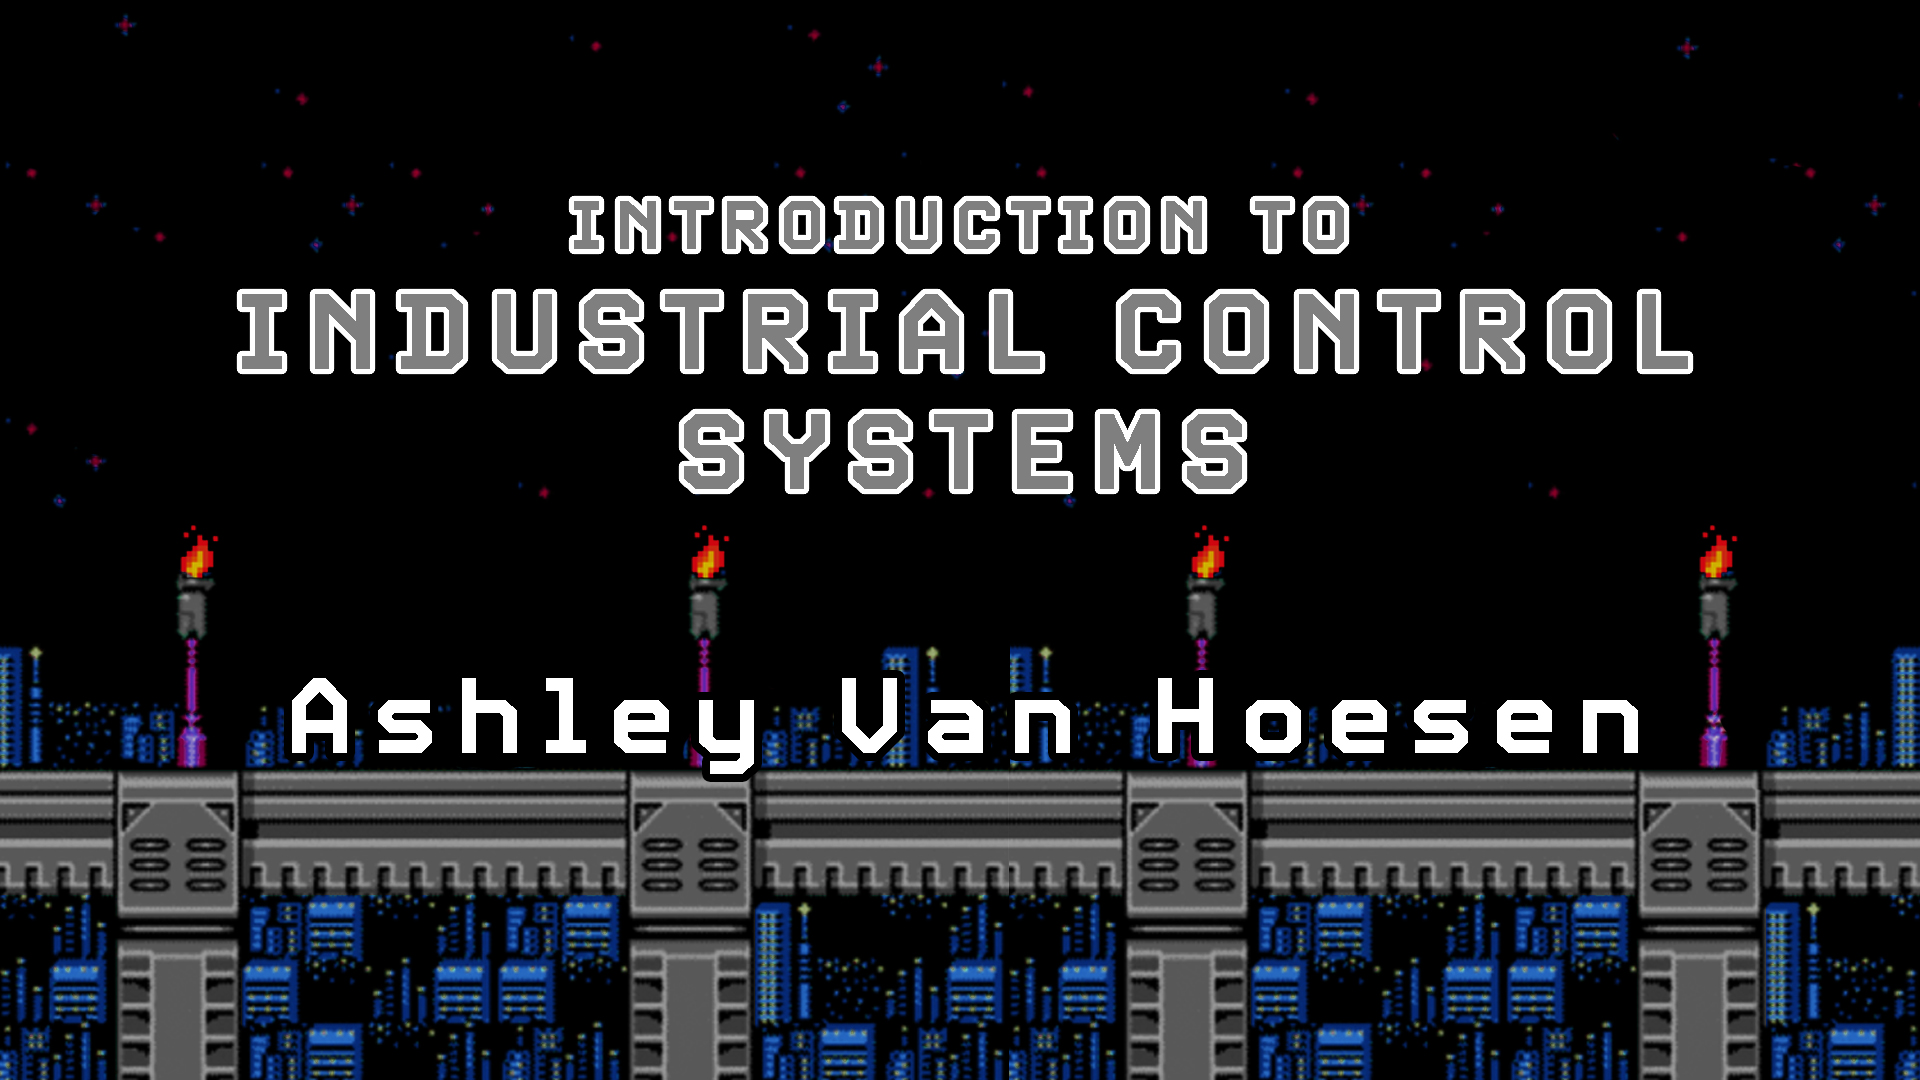 Introduction to Industrial Control Systems with Ashley Van Hoesen